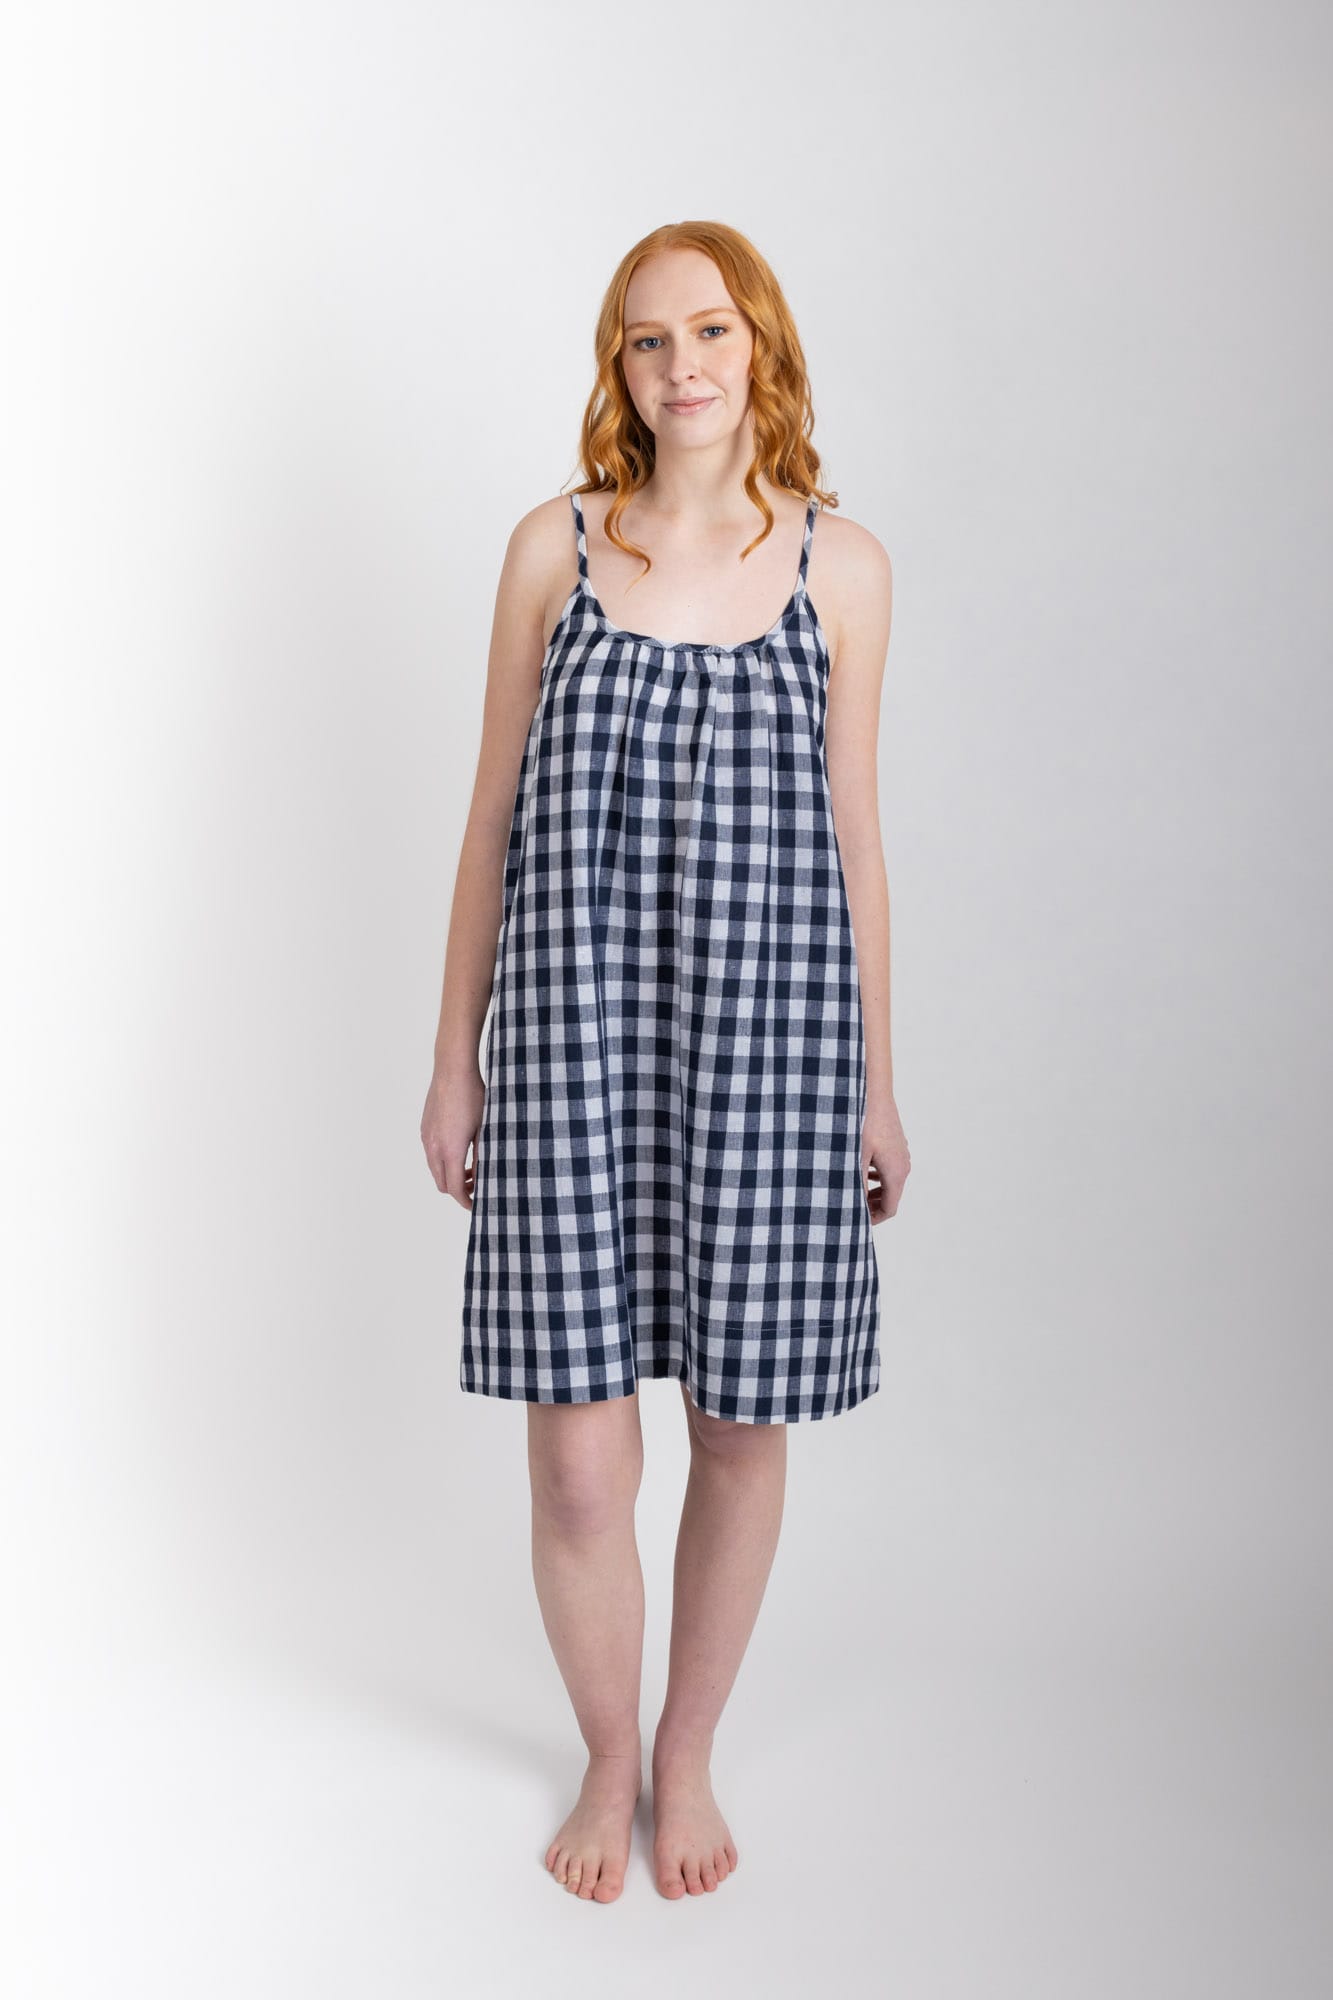 This knee length women’s nightdress dress features a scoop neck, adjustable spaghetti straps and side pockets. Finished with a wide hem, French seams, it is made from an organic cotton and linen blend, in a navy check